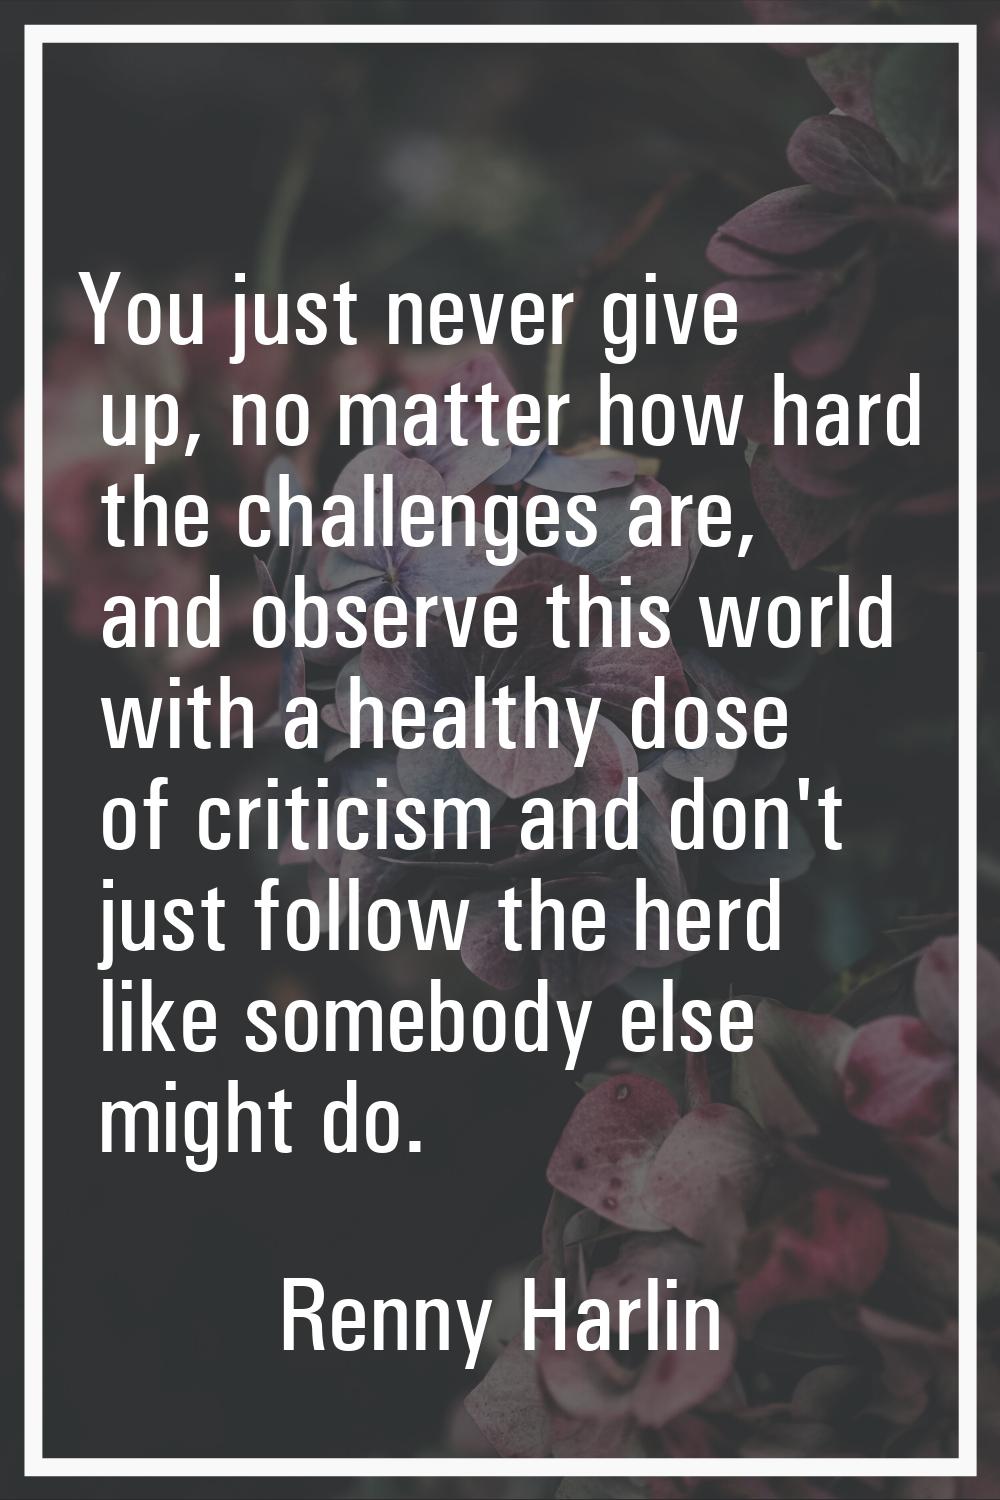 You just never give up, no matter how hard the challenges are, and observe this world with a health